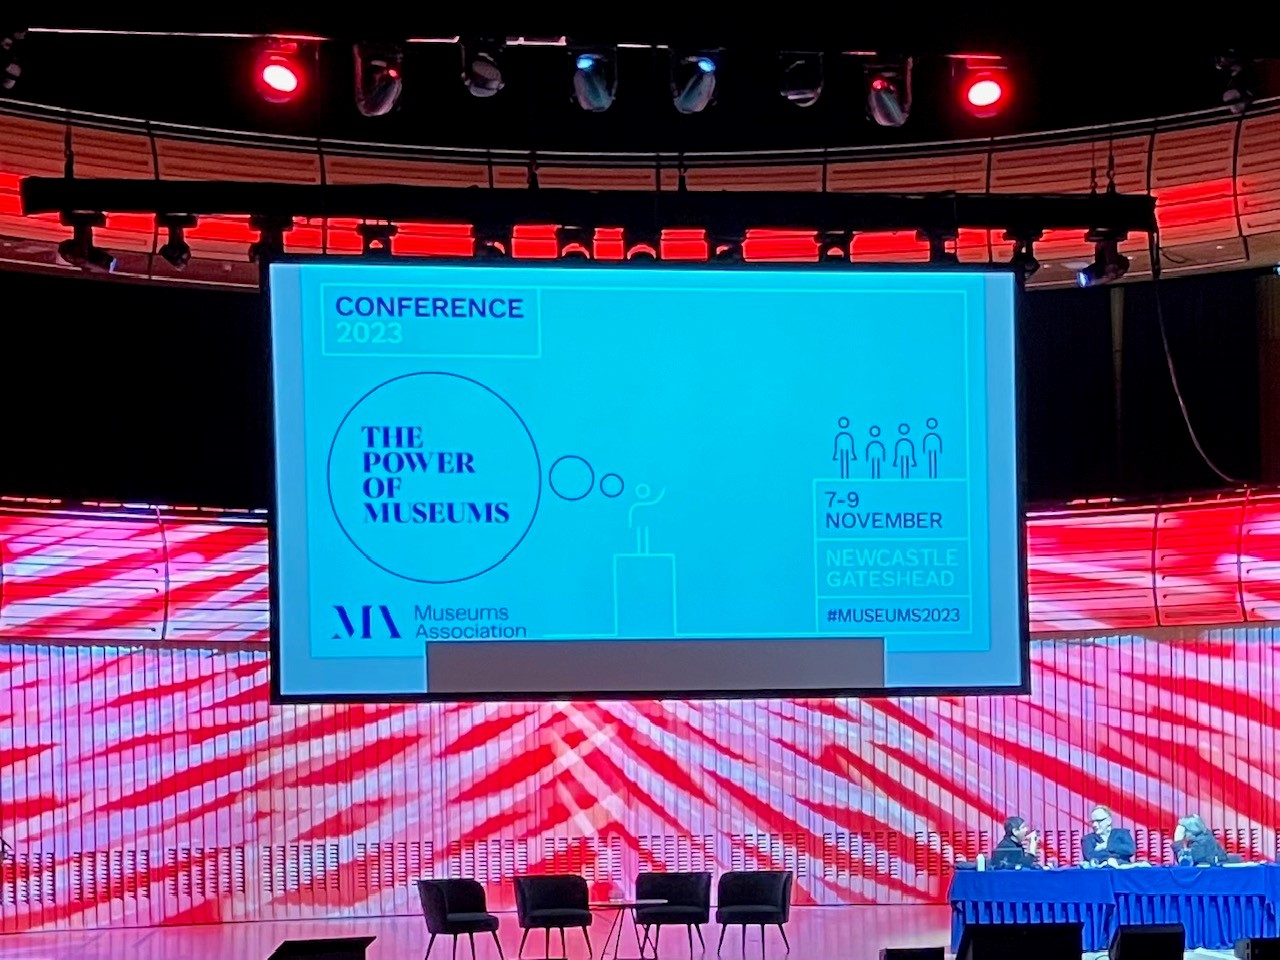 The image shows the conference stage with a screen showing 'The Power of Museums and the Museum Association logo